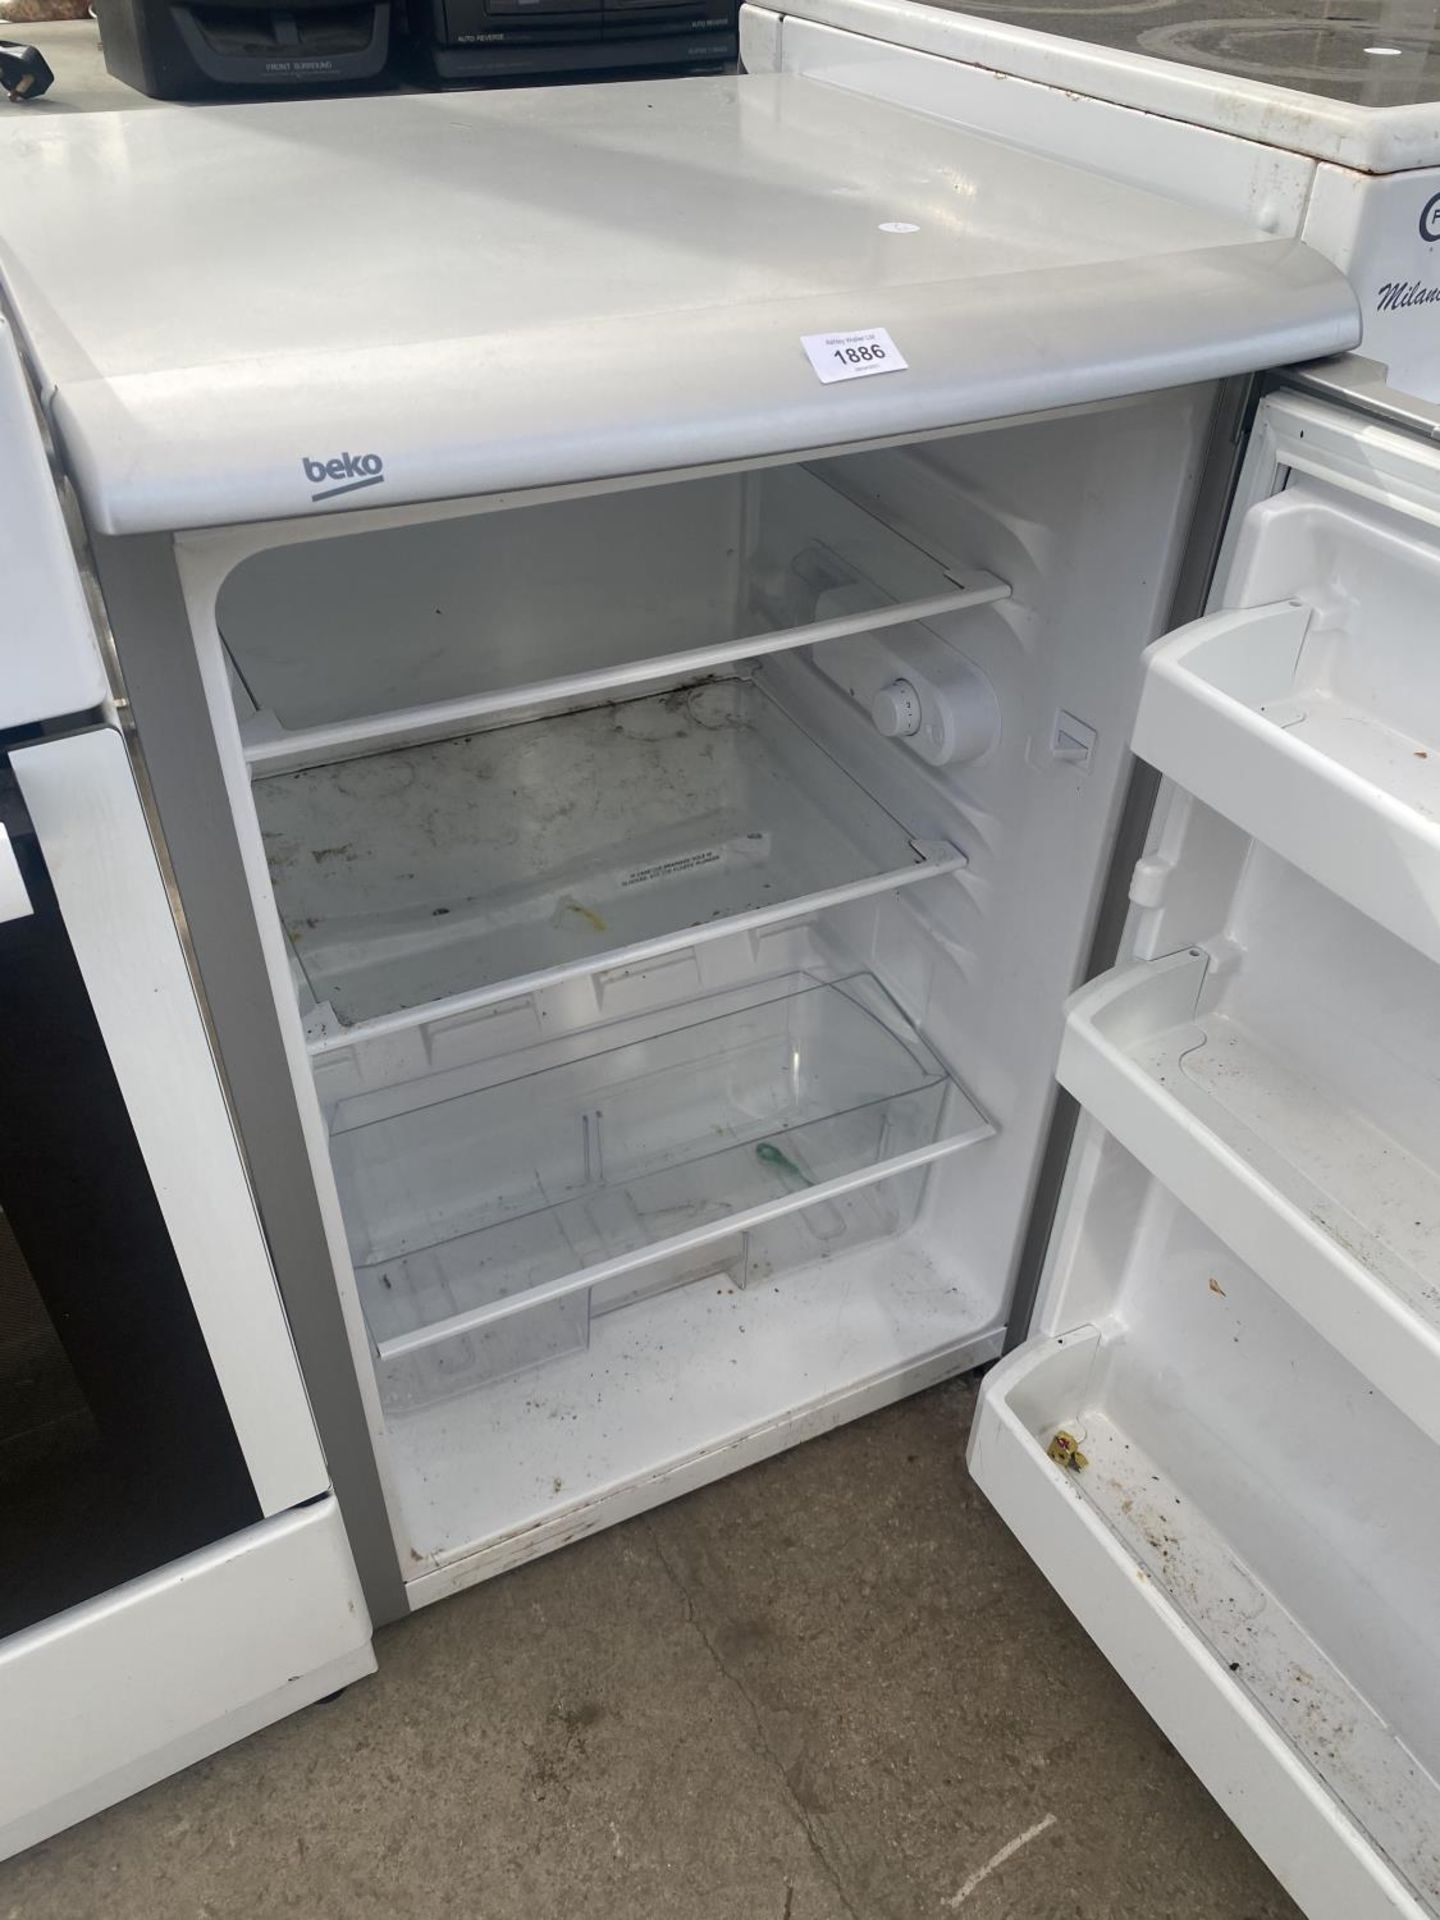 A SILVER BEKO UNDER COUNTER FRIDGE BELIEVED IN WORKING ORDER BUT NO WARRANTY - Image 2 of 3